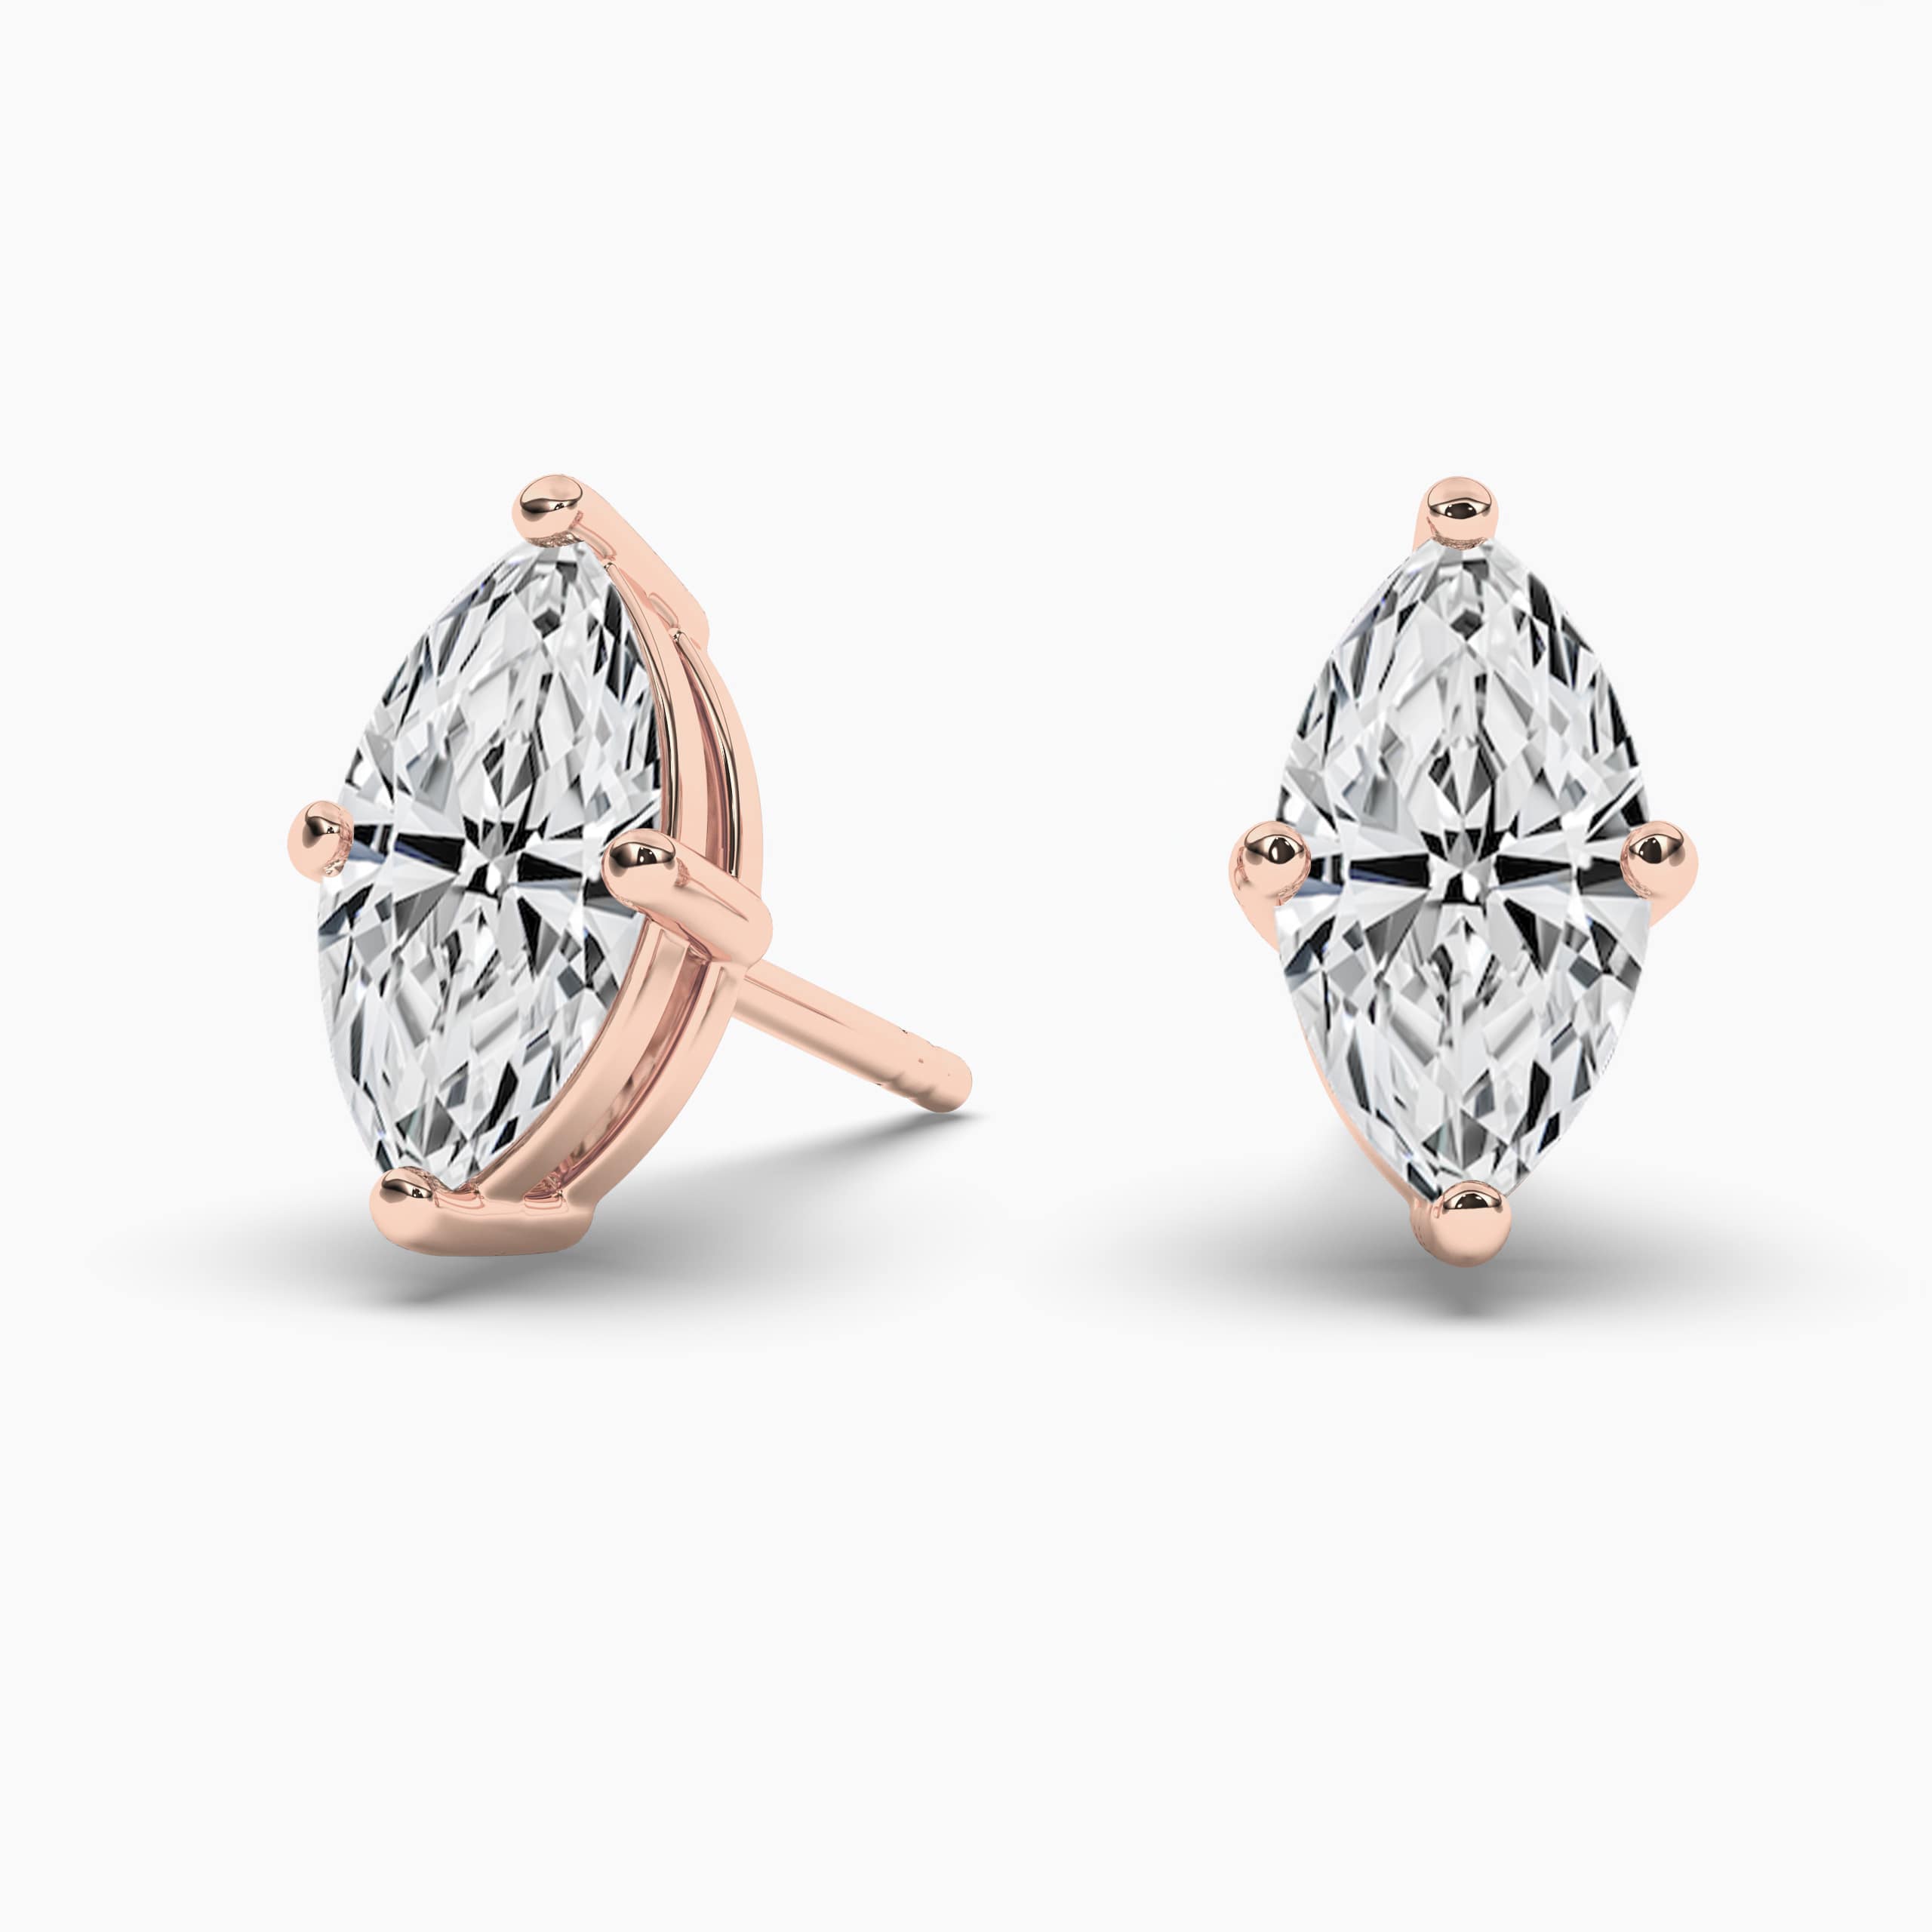 MARQUISE DIAMOND EARRINGS IN ROSE GOLD